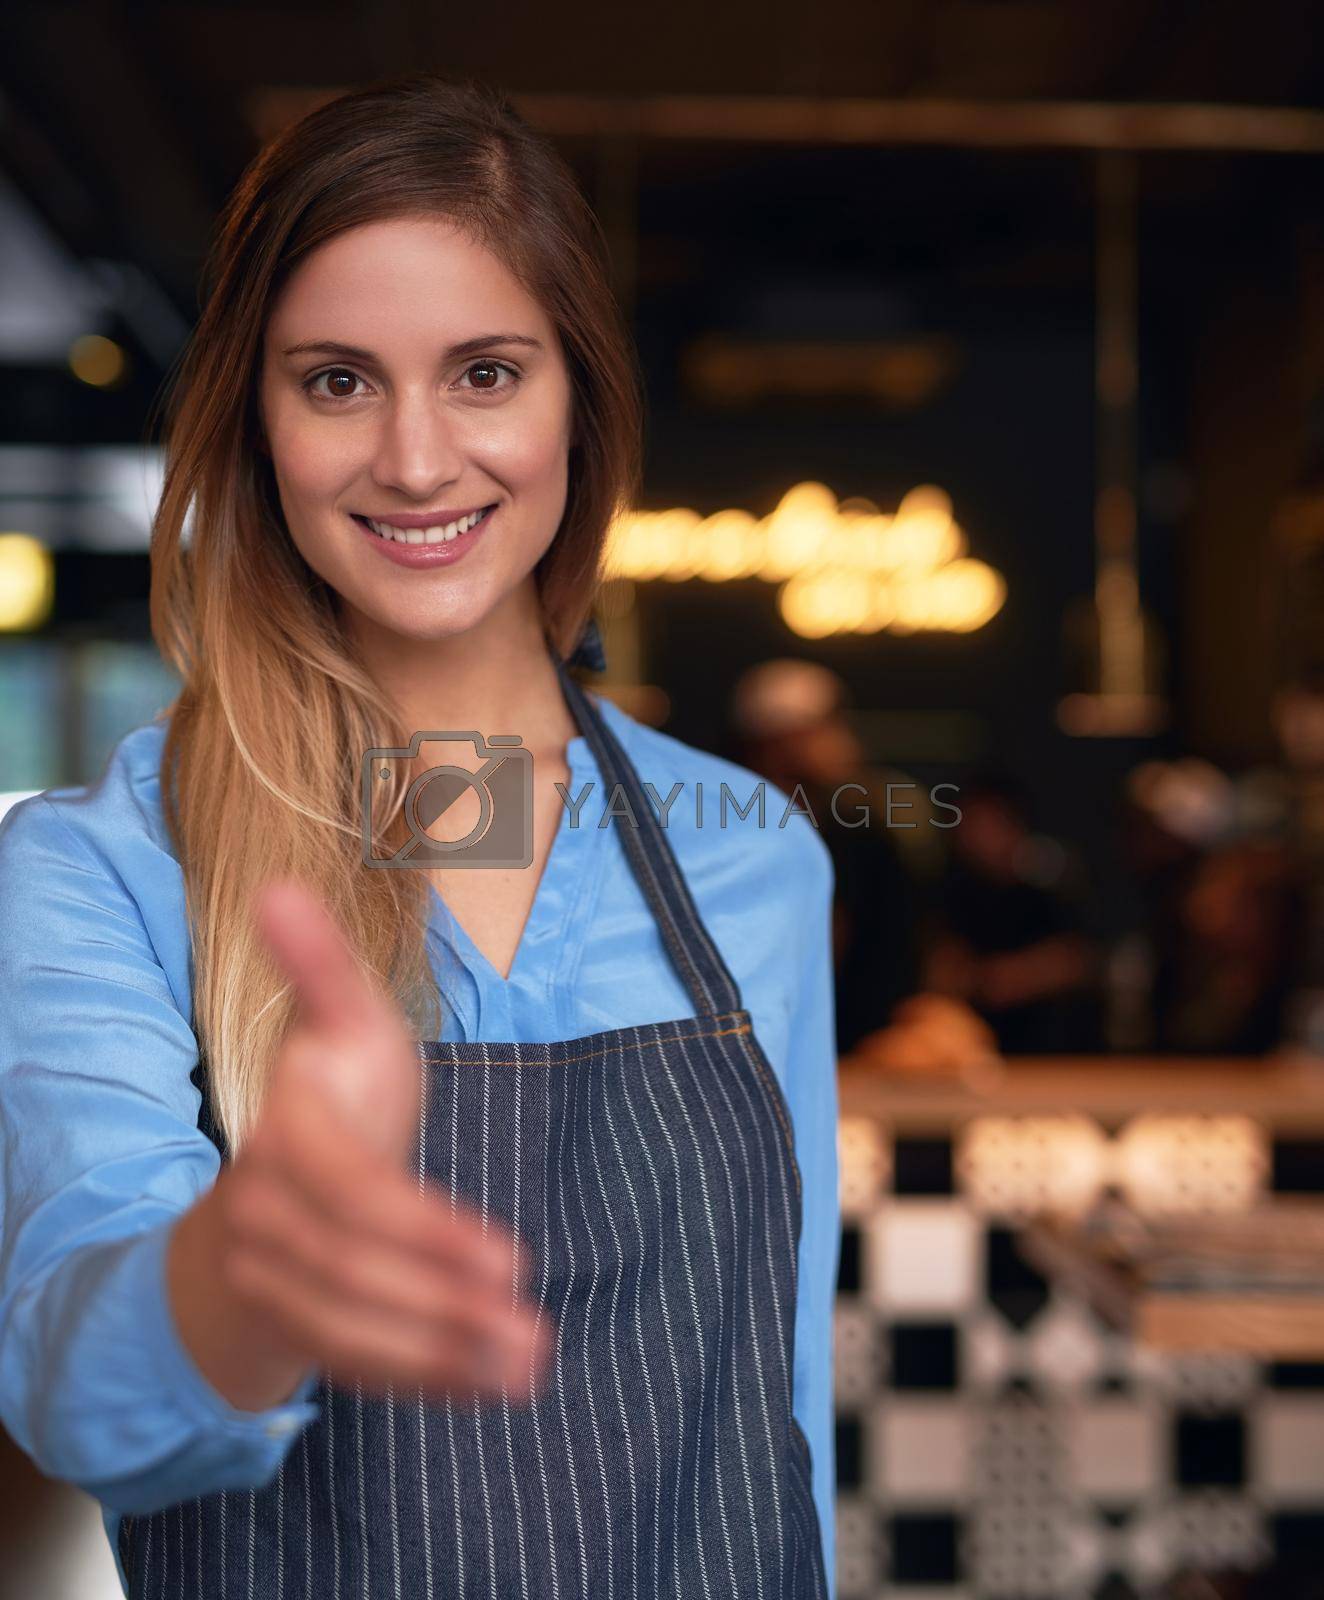 Royalty free image of Welcome to my coffee shop. Cropped portrait of an attractive young woman welcoming you into her coffee shop. by YuriArcurs